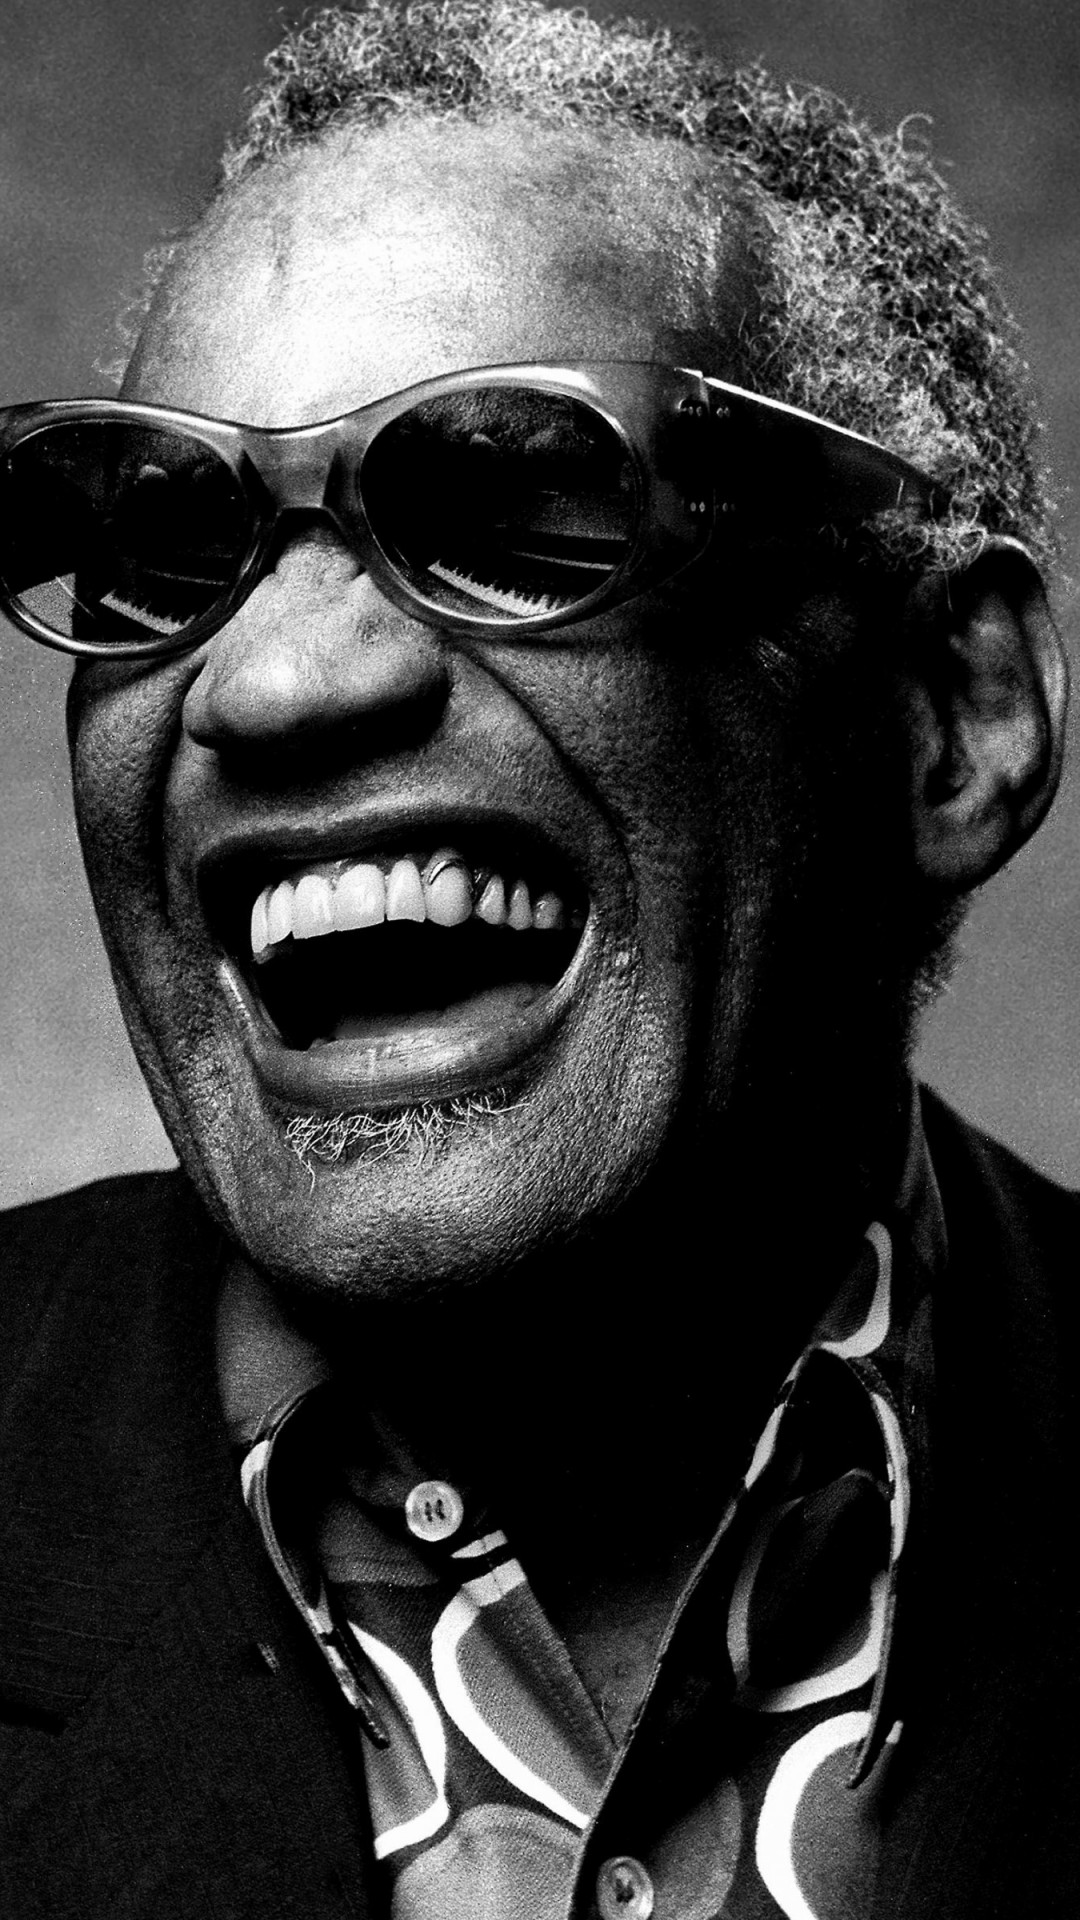 Ray Charles Portrait in Black & White Wallpaper for HTC One